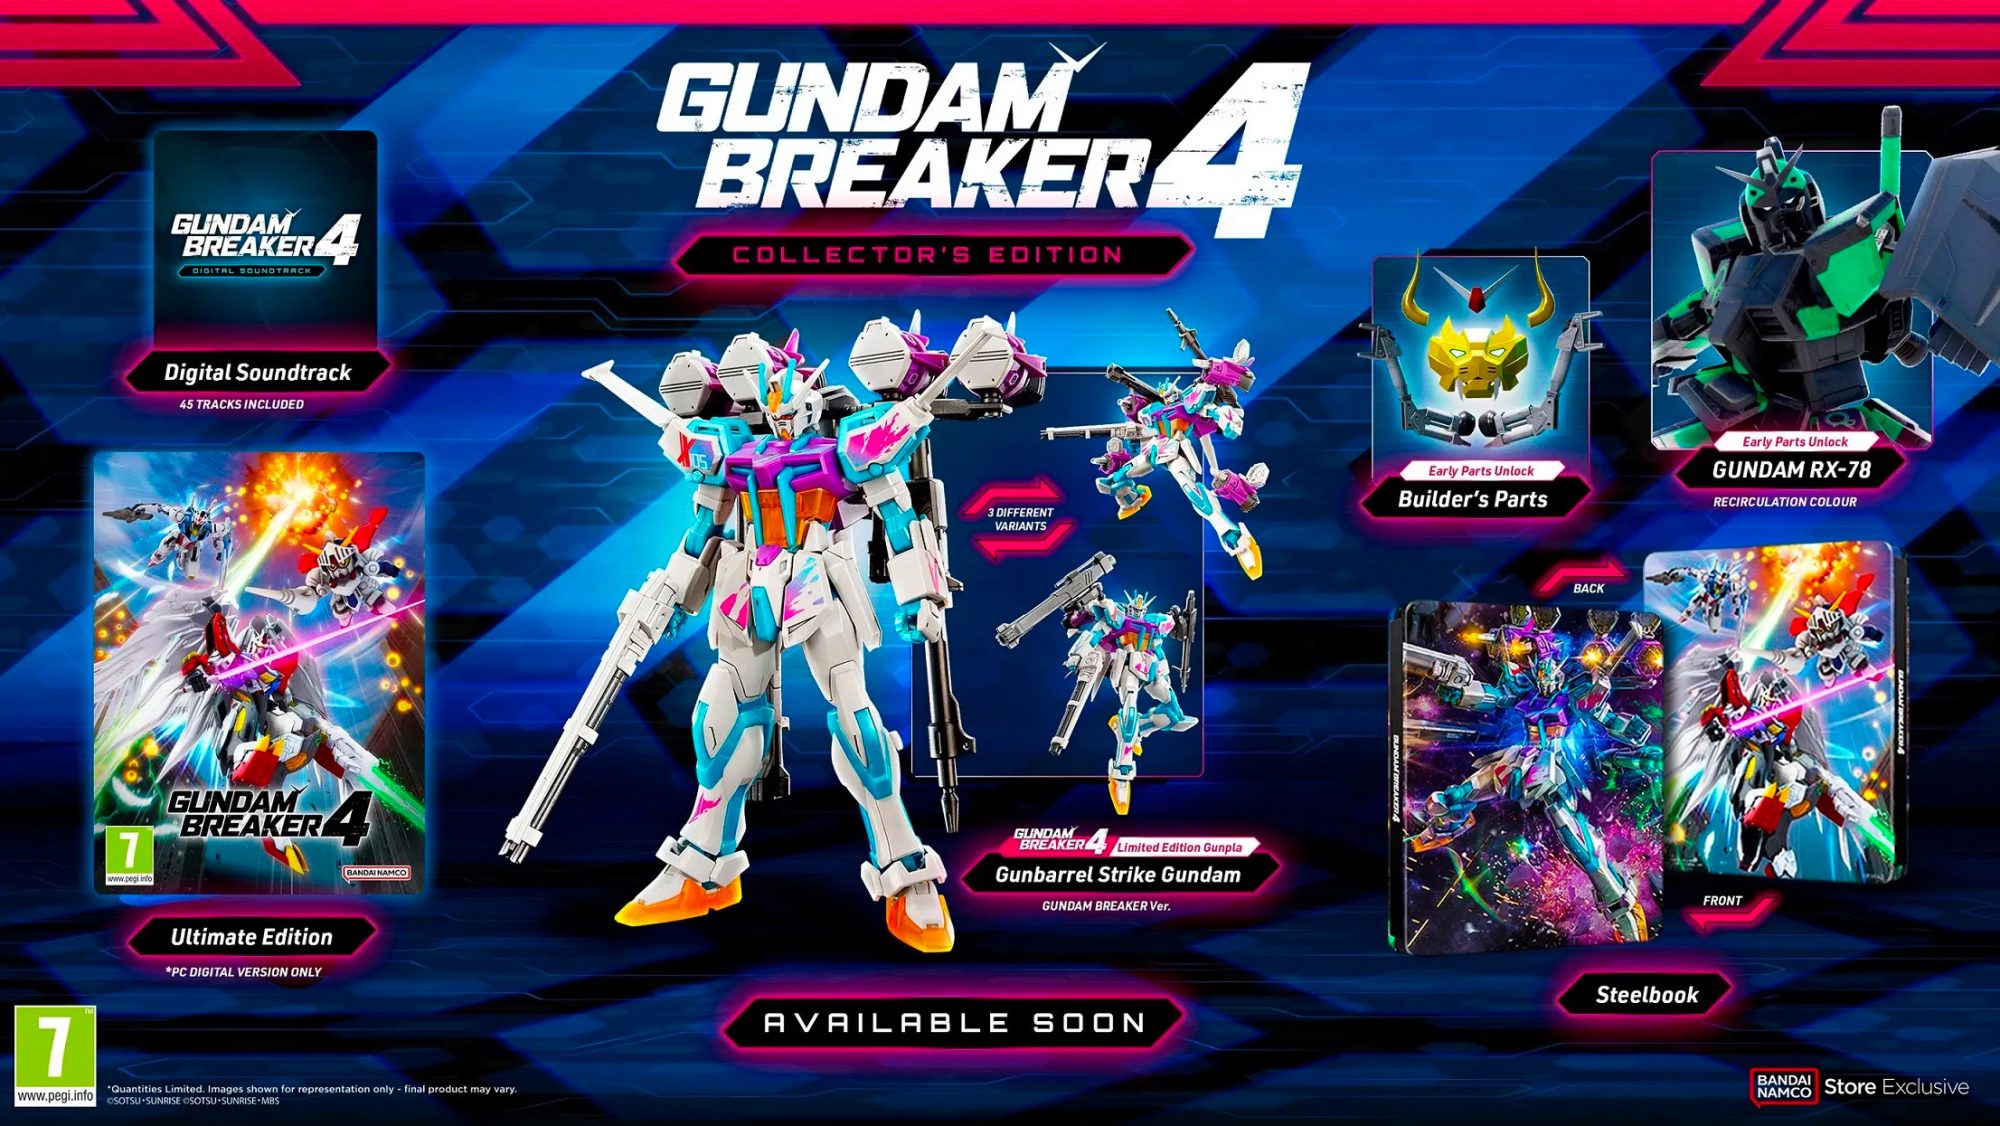 GUNDAM BREAKER 4: Collector's Edition available for pre-order on the BANDAI NAMCO store